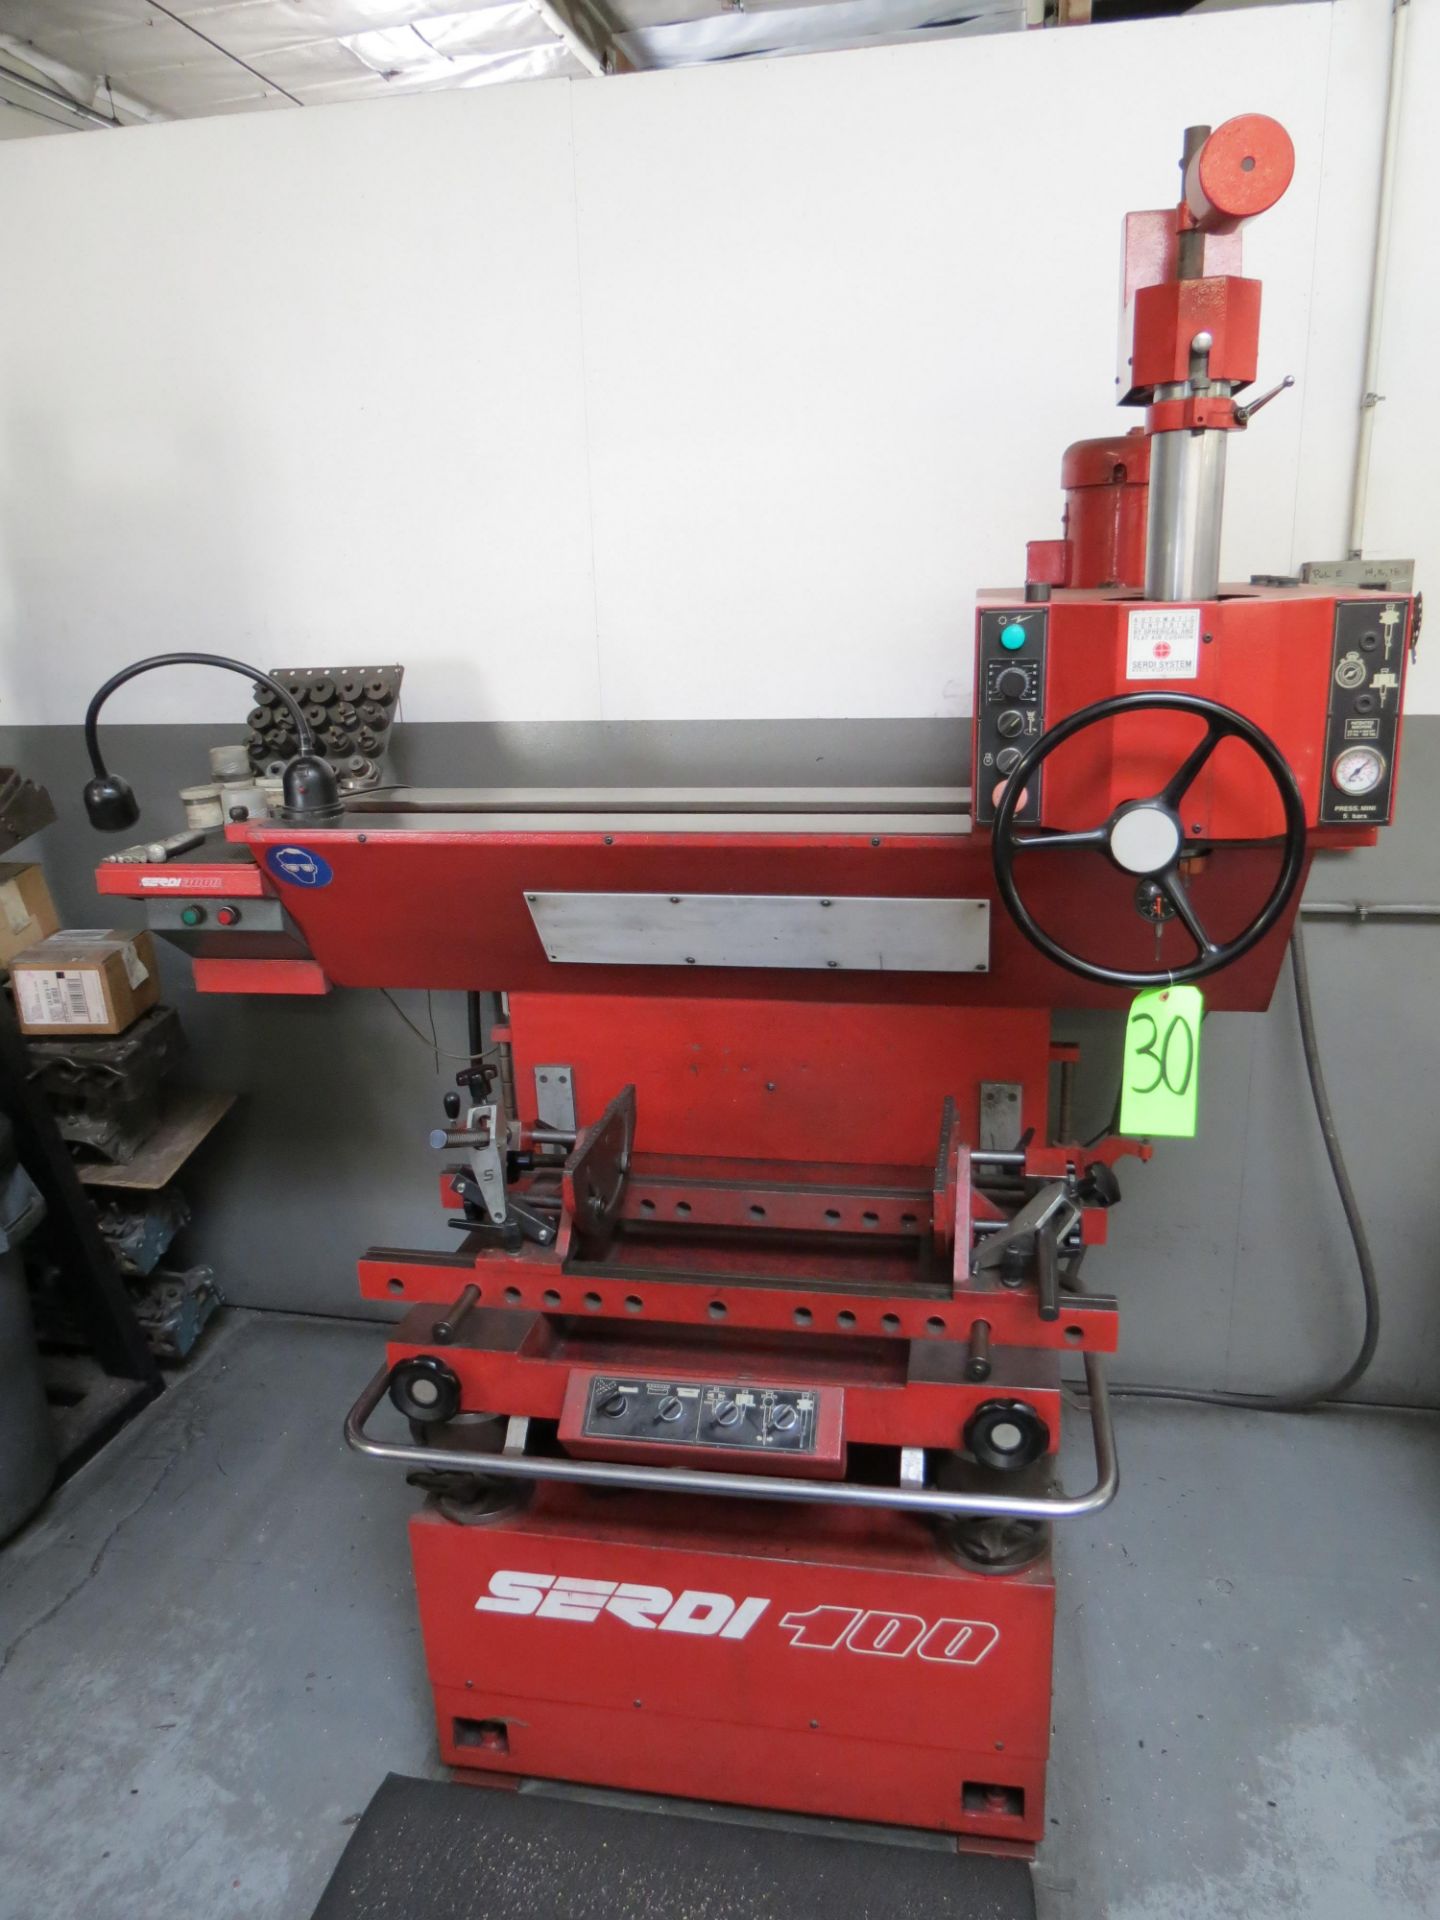 SERDI 100 VALVE SEAT CUTTING MACHINE WITH AND GUIDE AND SEAT TOOLING 1" TO 2 1/2"